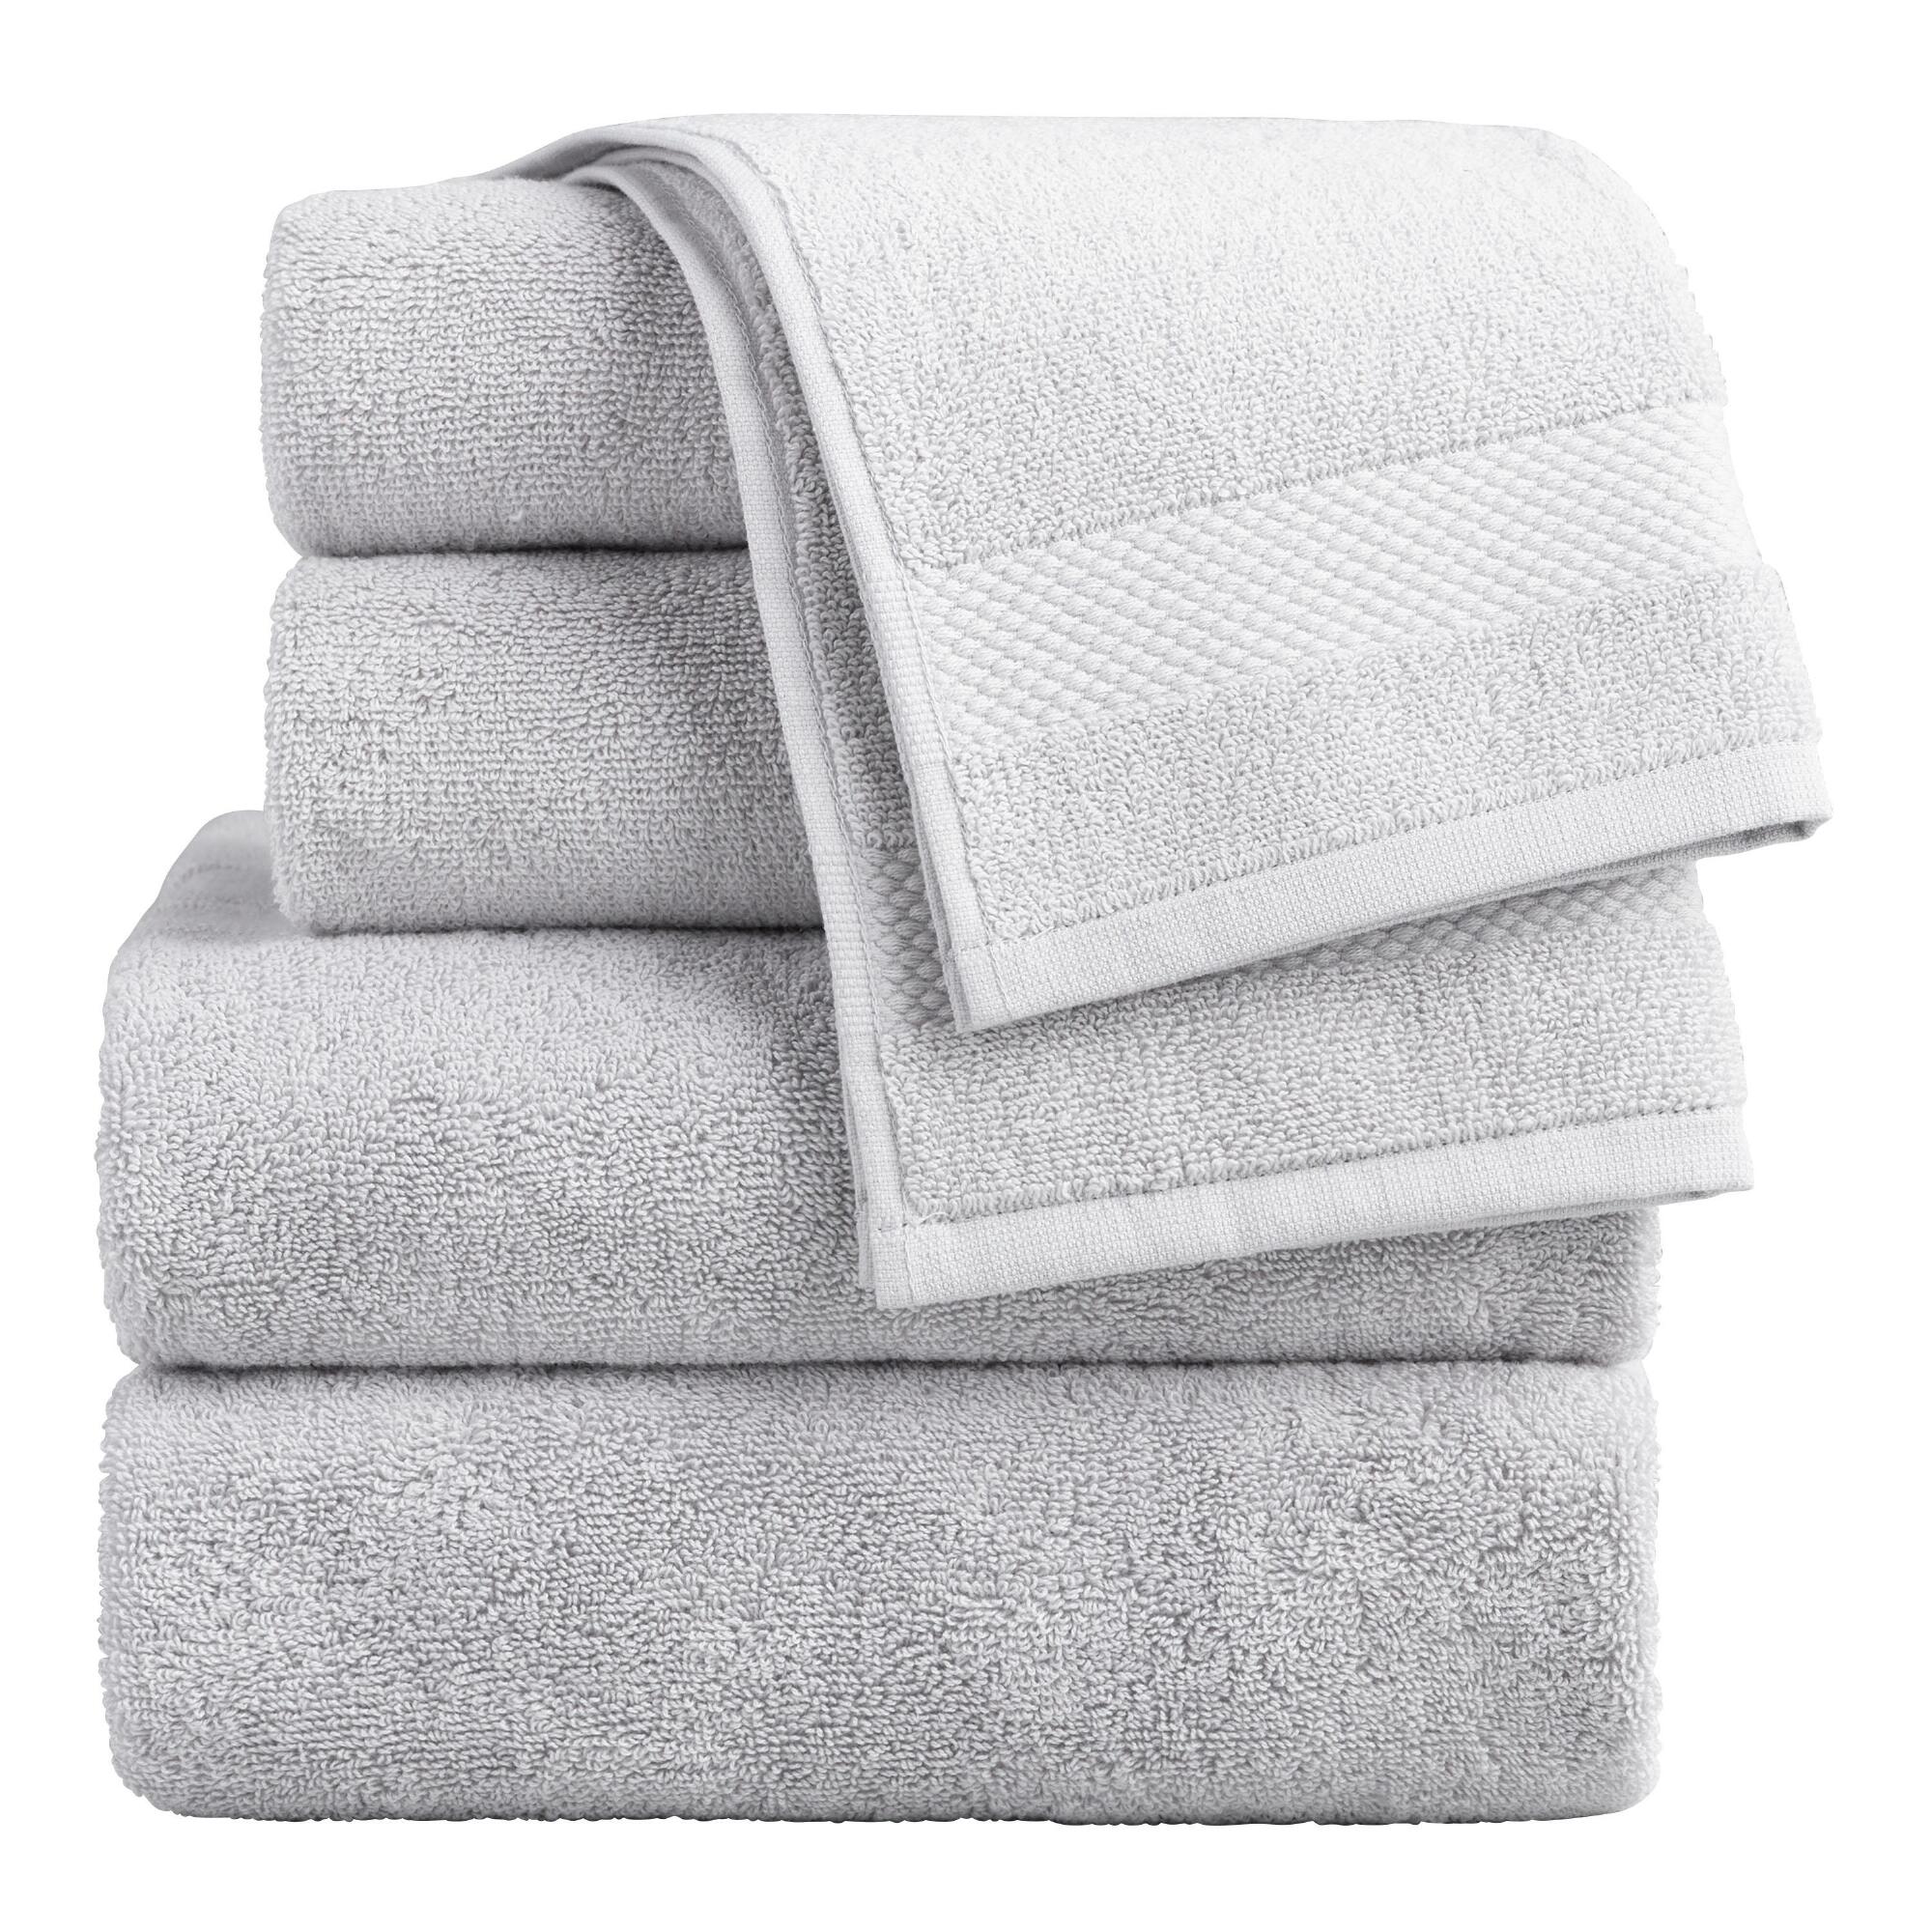 Pebble Gray Cotton Bath Towel Collection by World Market